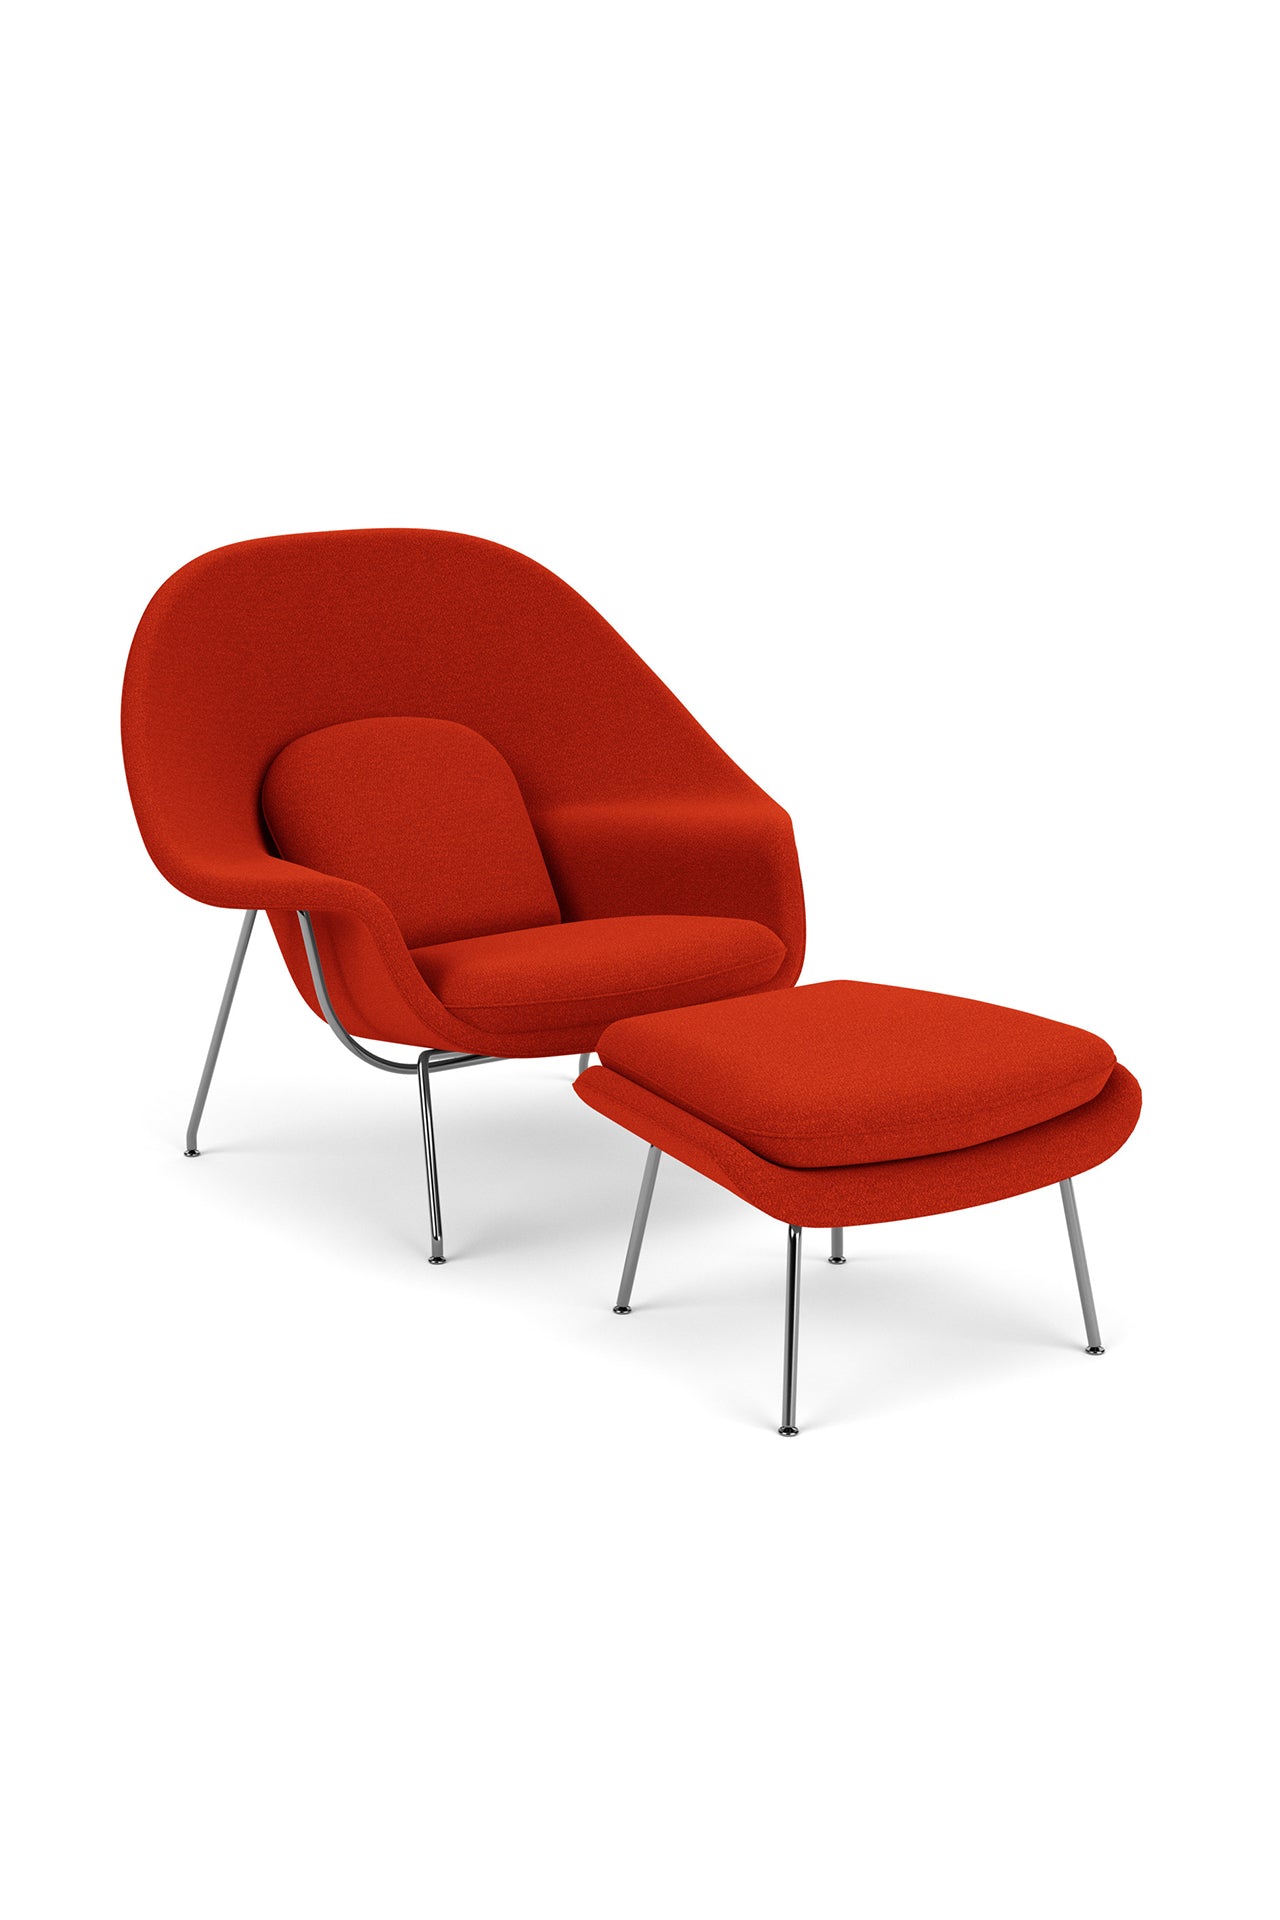 Knoll Womb Chair With Ottoman Designed By Eero Saarinen in Crimson Red - Front Image (6606269907059)